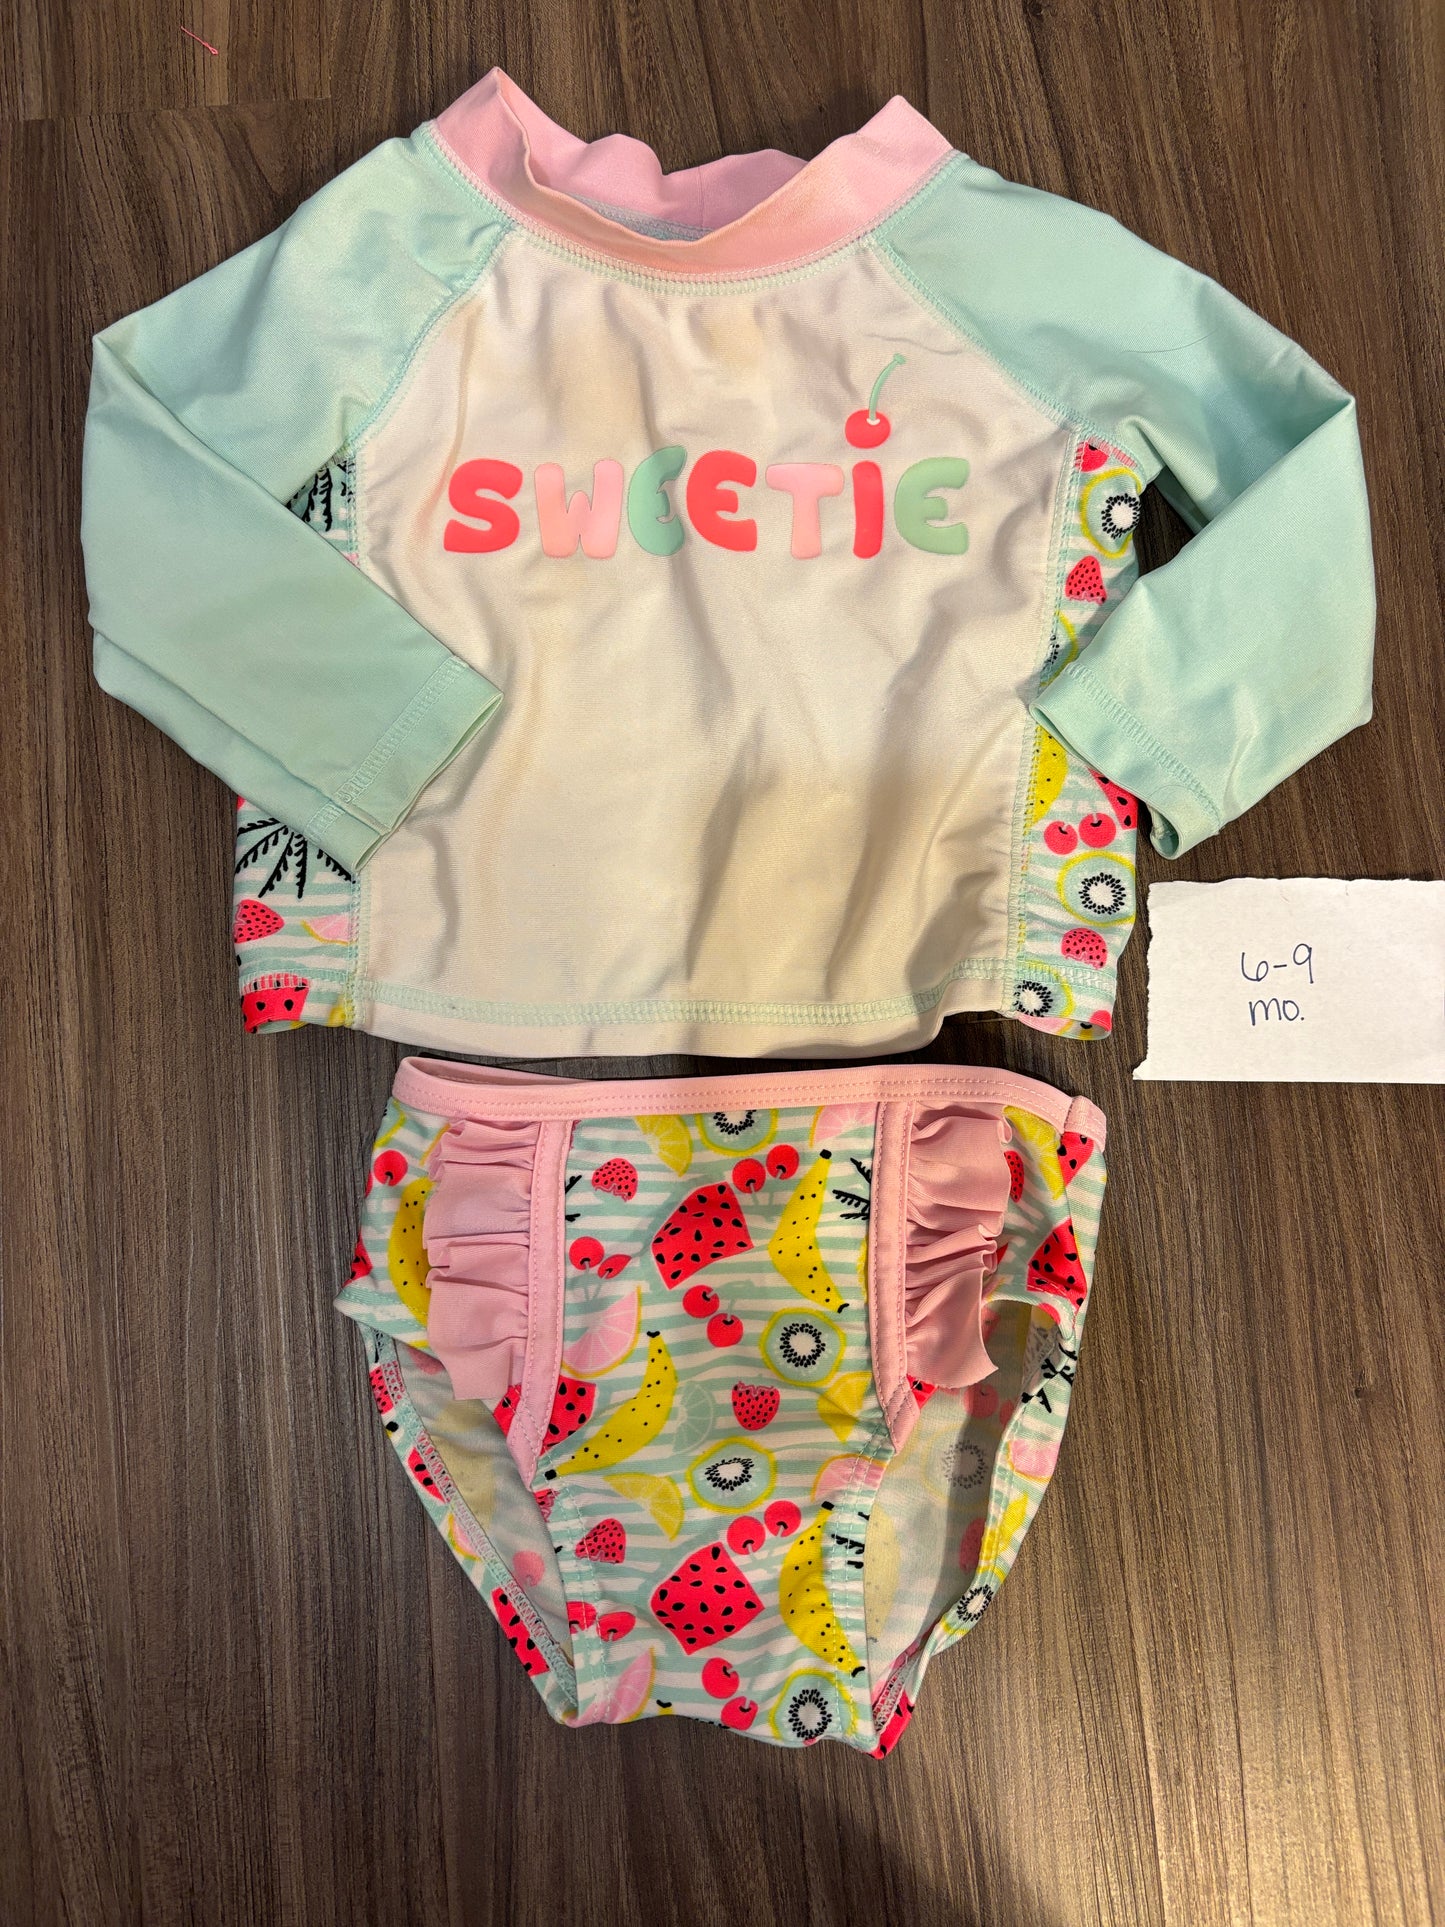 6-9 Mo -  - Sweetie 2 Piece Swimsuit - PU 45236 Except Semiannual Sale